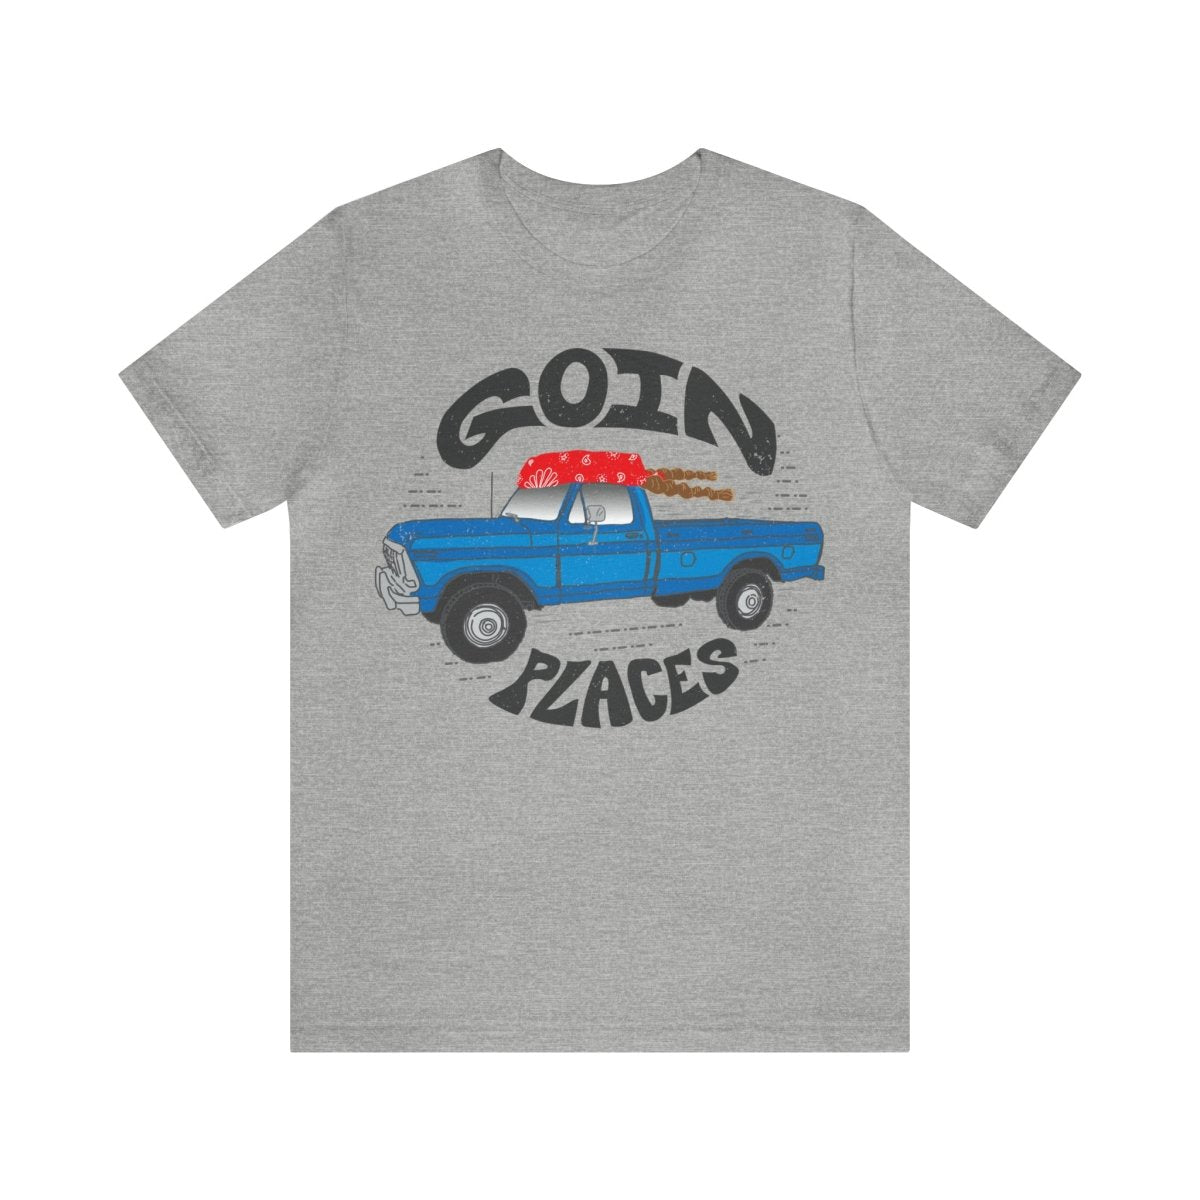 Goin Places Premium T-Shirt, Highway Gypsy, Travel